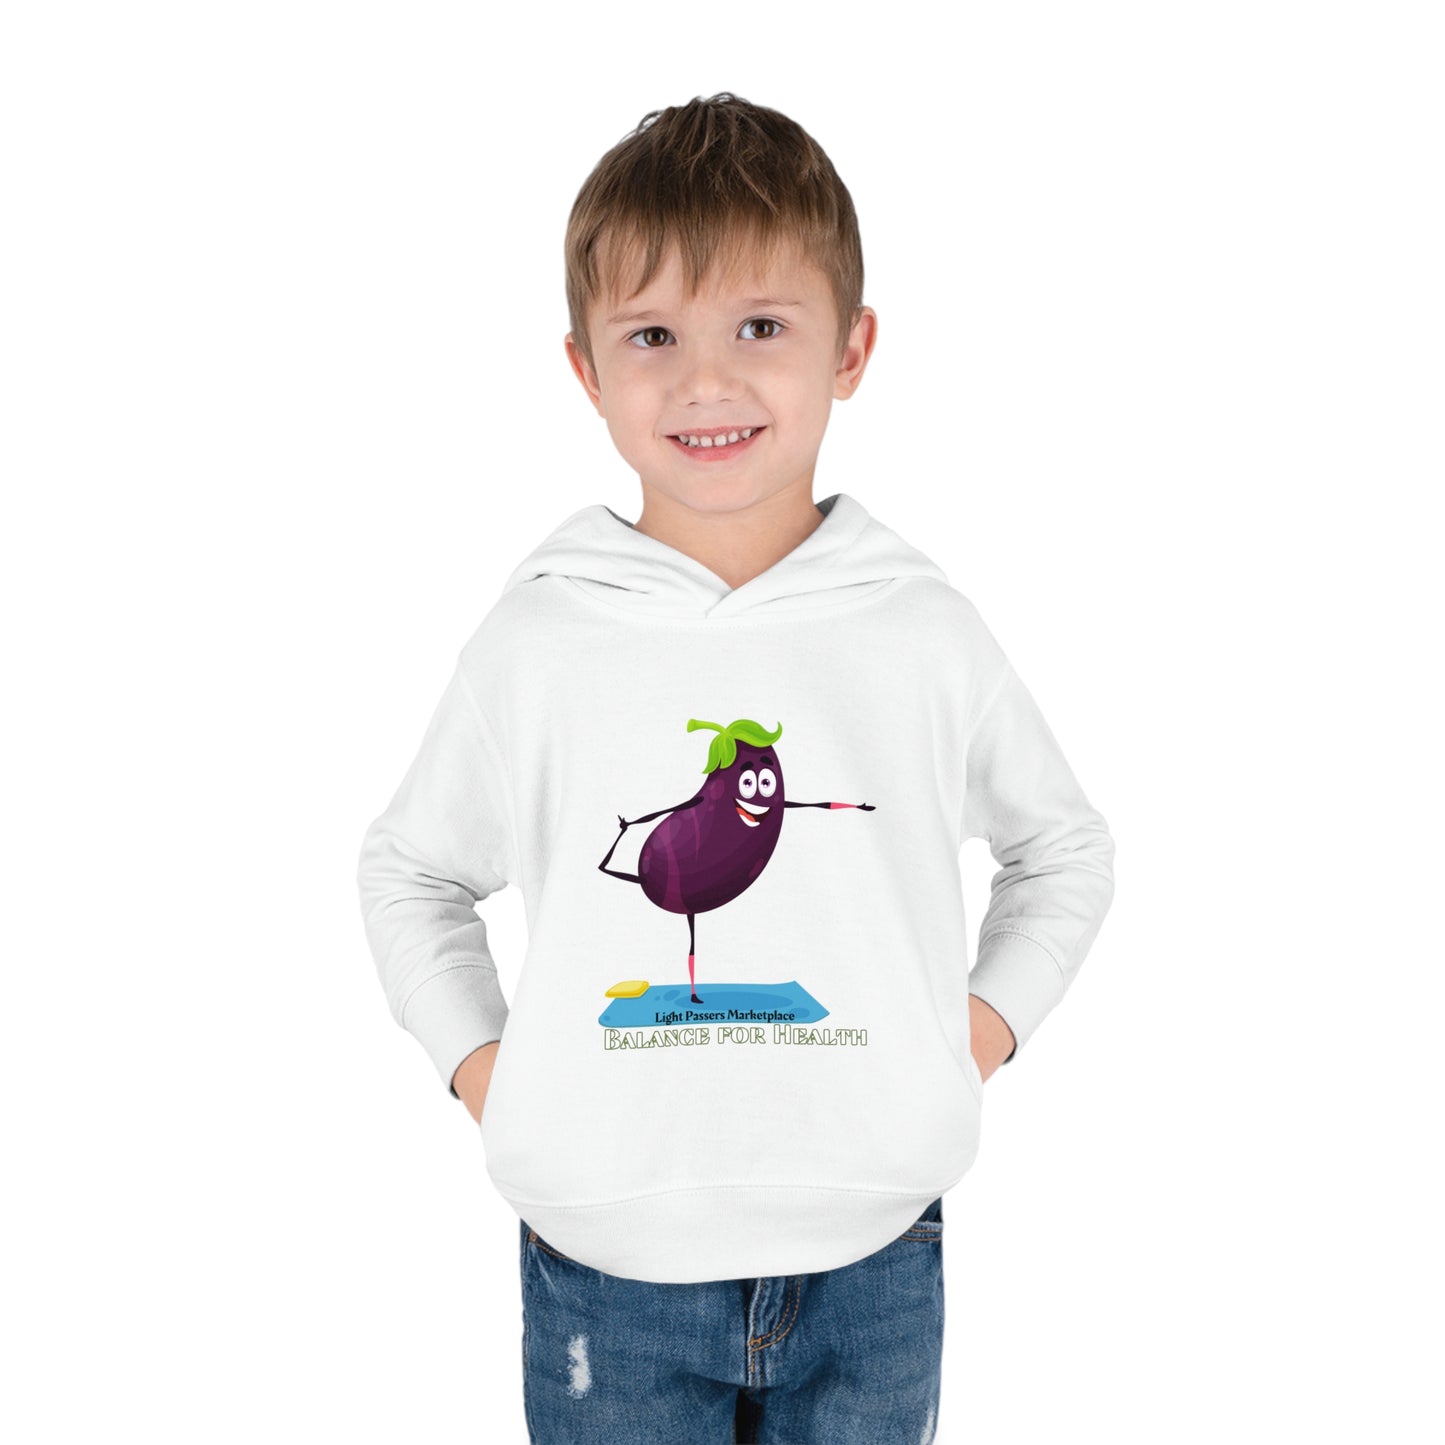 Light Passers Marketplace Eggplant Balance for Health Toddler Pullover Hoodie Sweatshirt Nutrition, Fitness